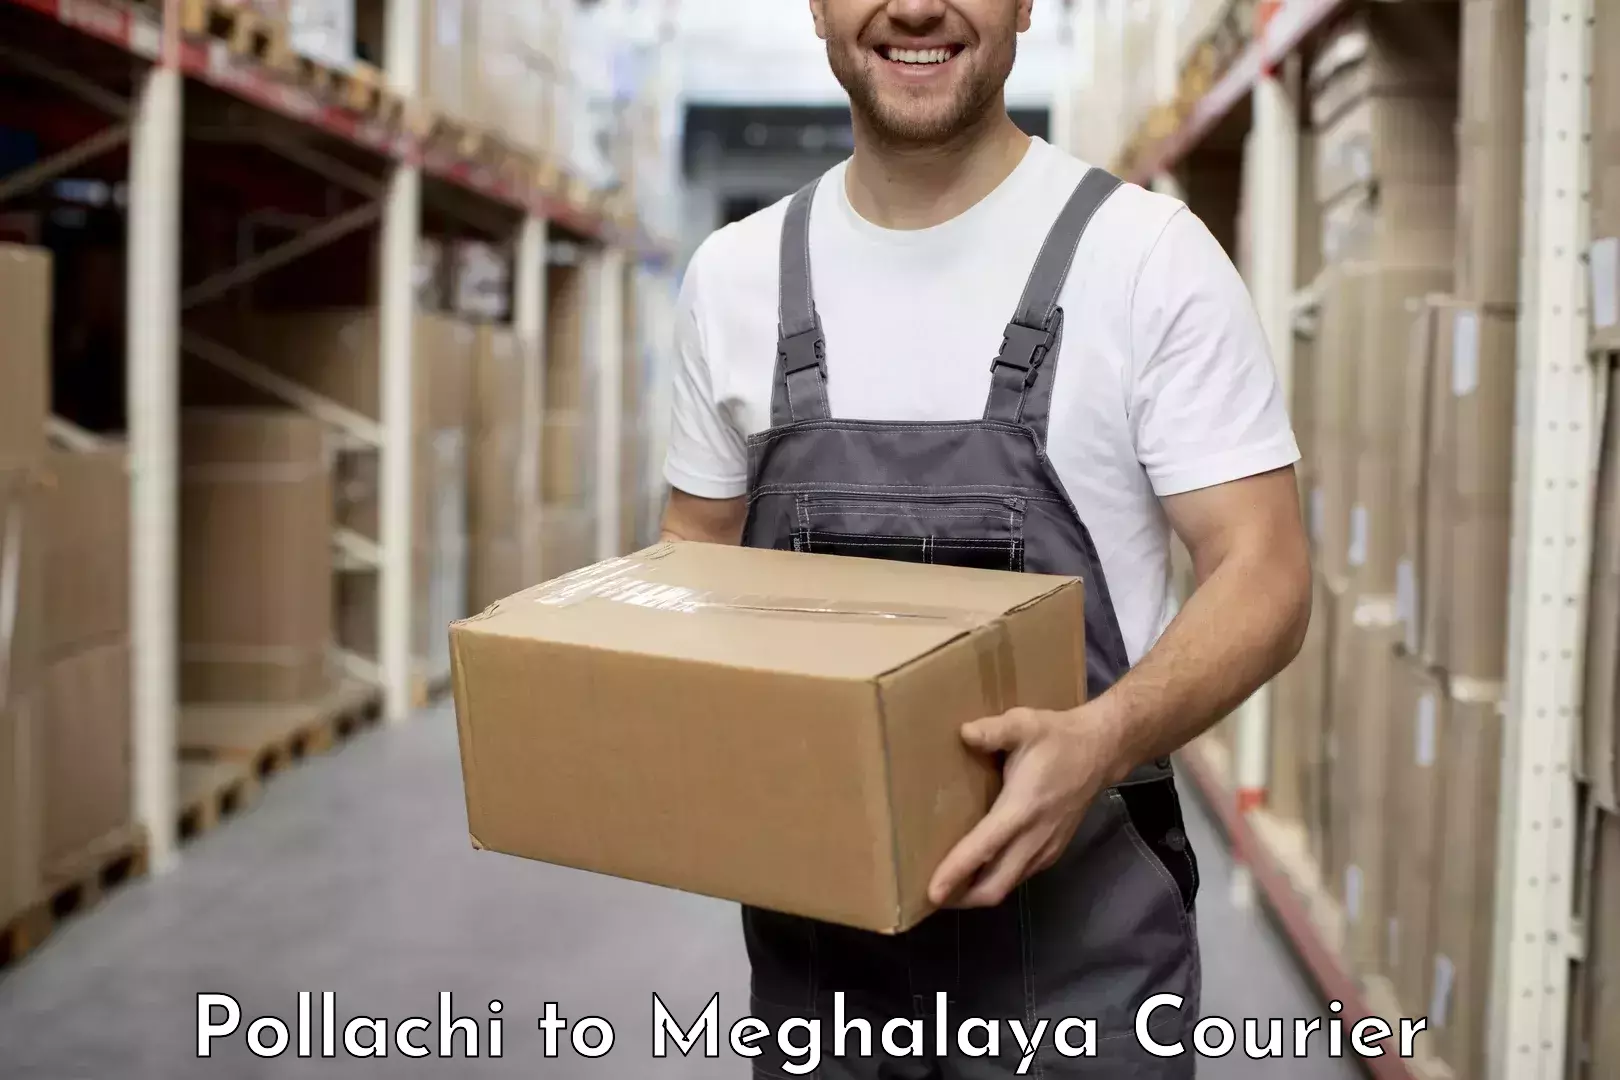 Courier service innovation Pollachi to Meghalaya